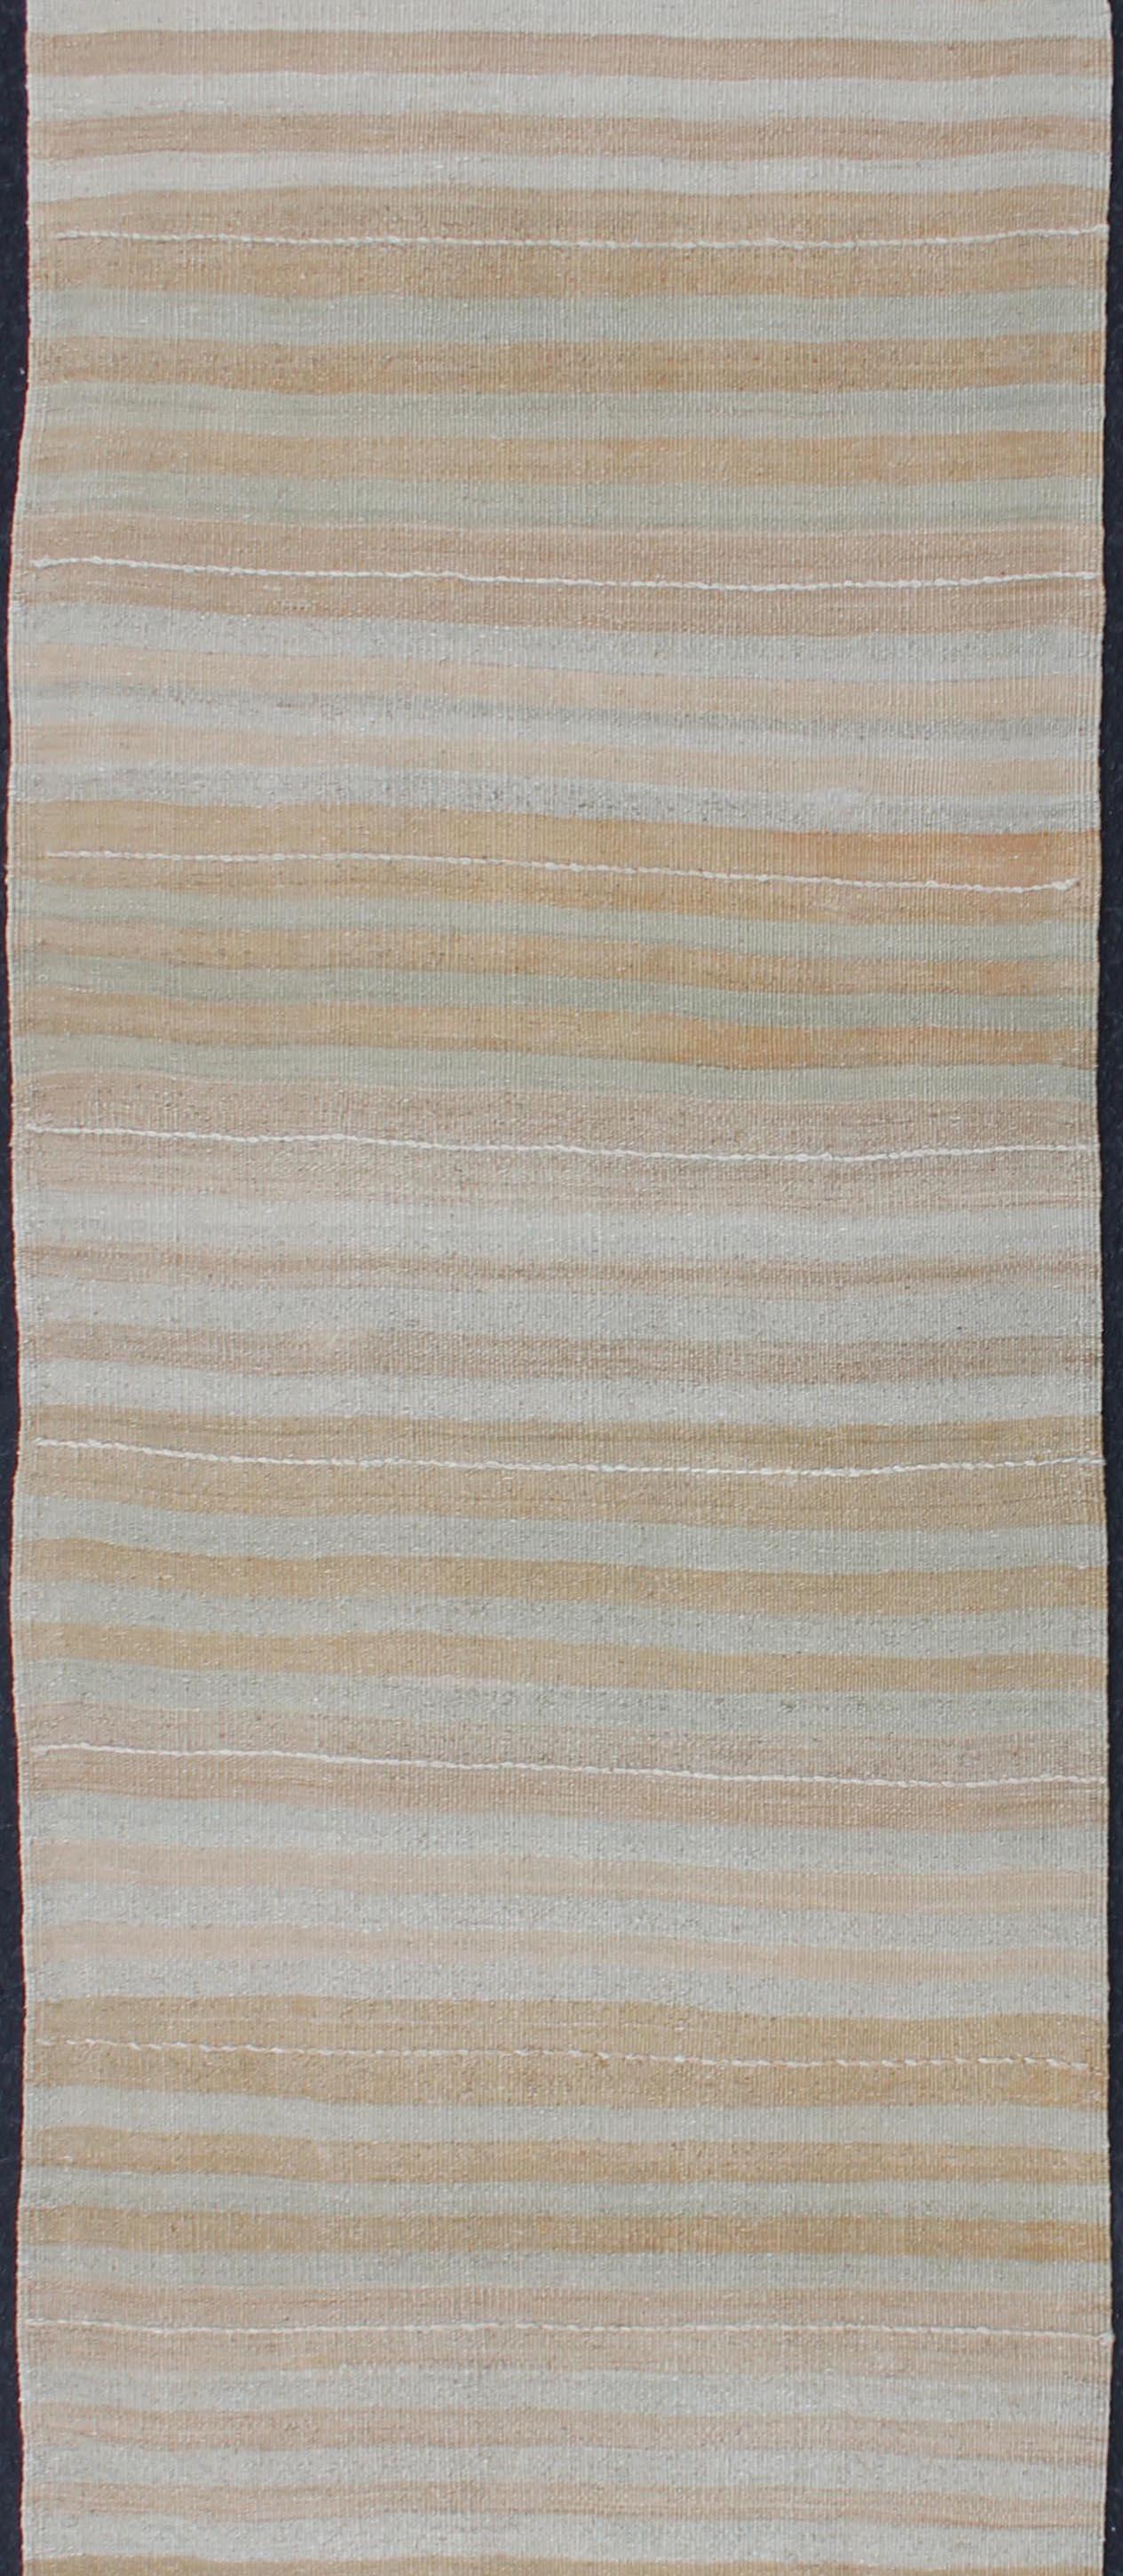 Stripe design Kilim runner in cream, light blue, light brown, light green, taupe, and butter yellow tones rug EN-179539, country of origin / type: Turkey / Kilim, circa 1950

This flat-woven Kilim runner from Turkey features an exciting